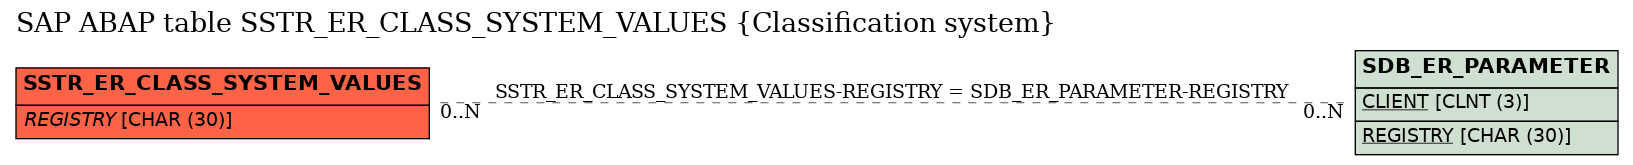 E-R Diagram for table SSTR_ER_CLASS_SYSTEM_VALUES (Classification system)